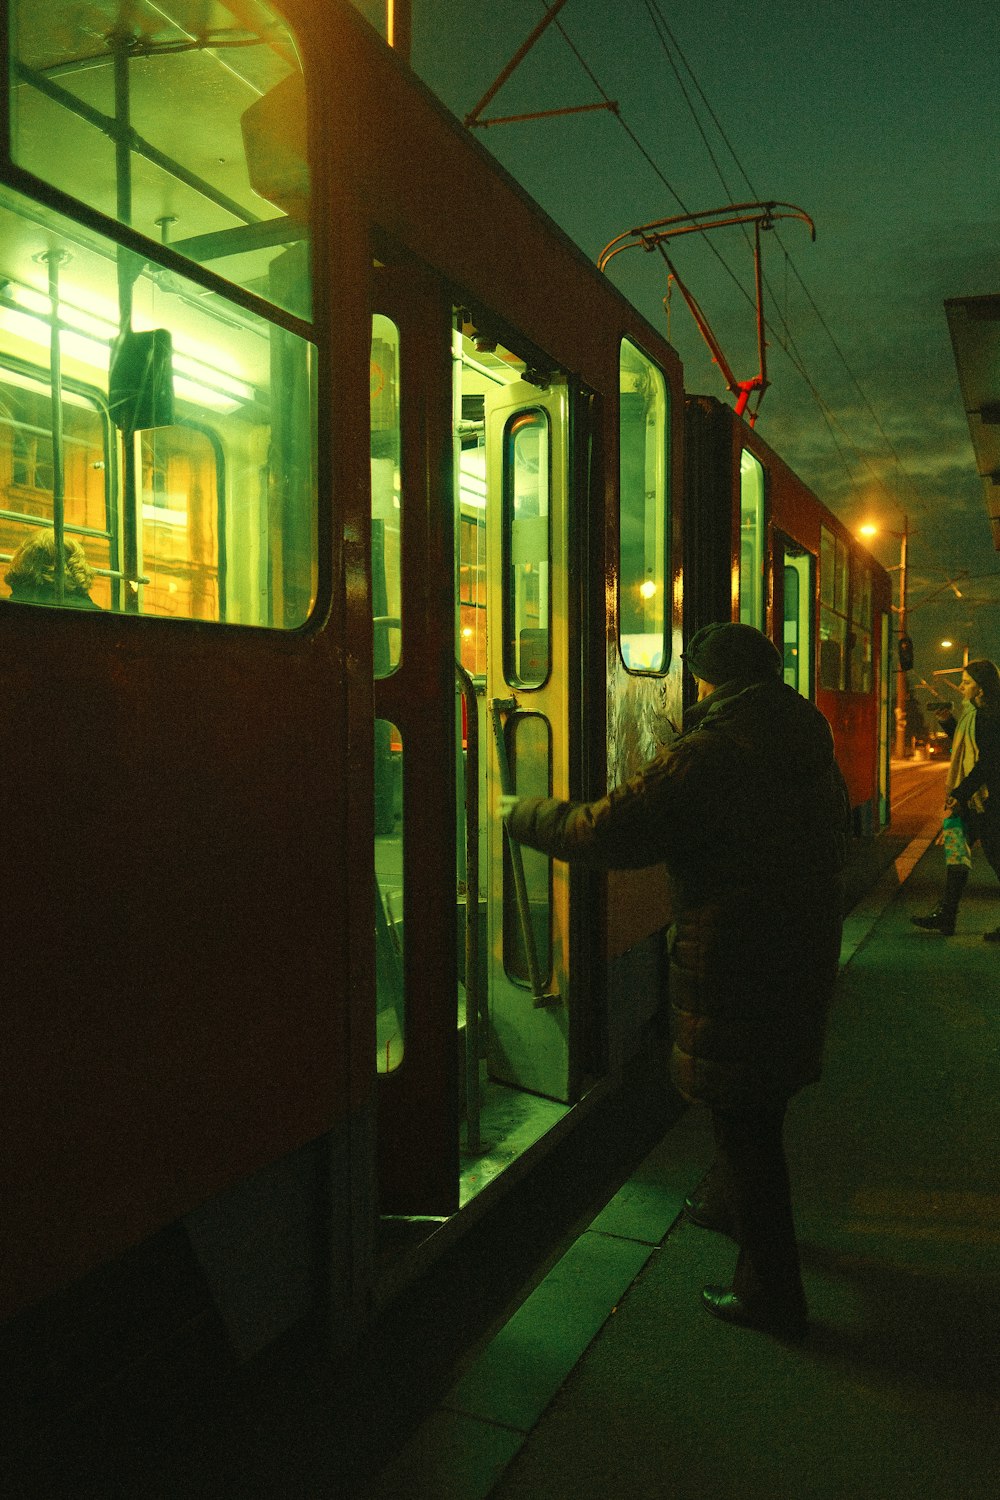 a person getting on a train at night